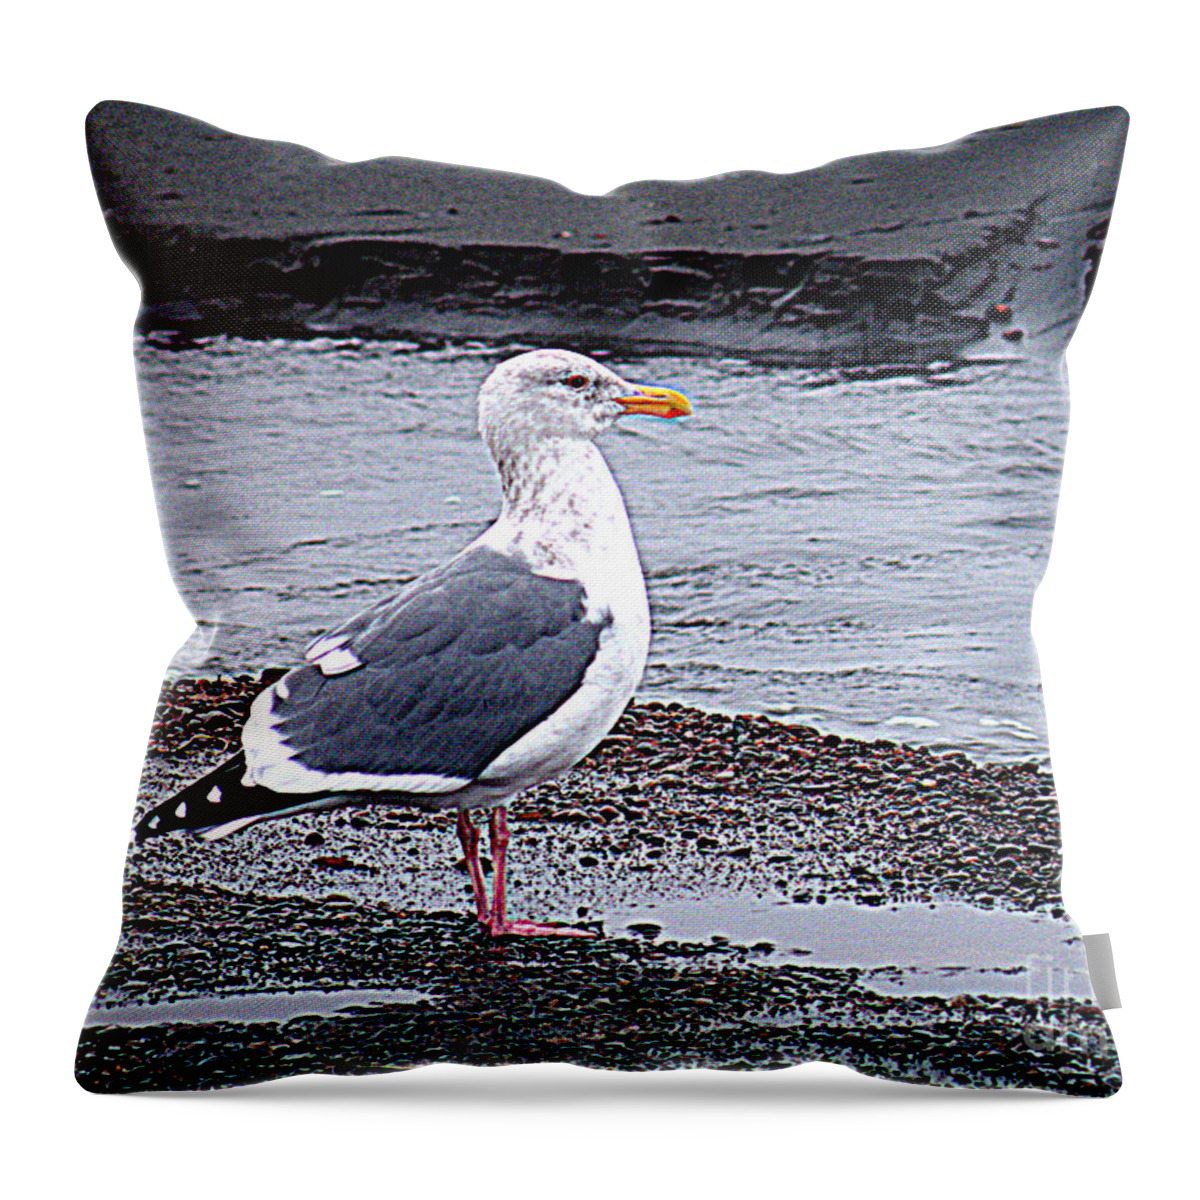 Pacific Ocean Throw Pillow featuring the photograph Seagull On The Beach Of The Pacific by Kathy White